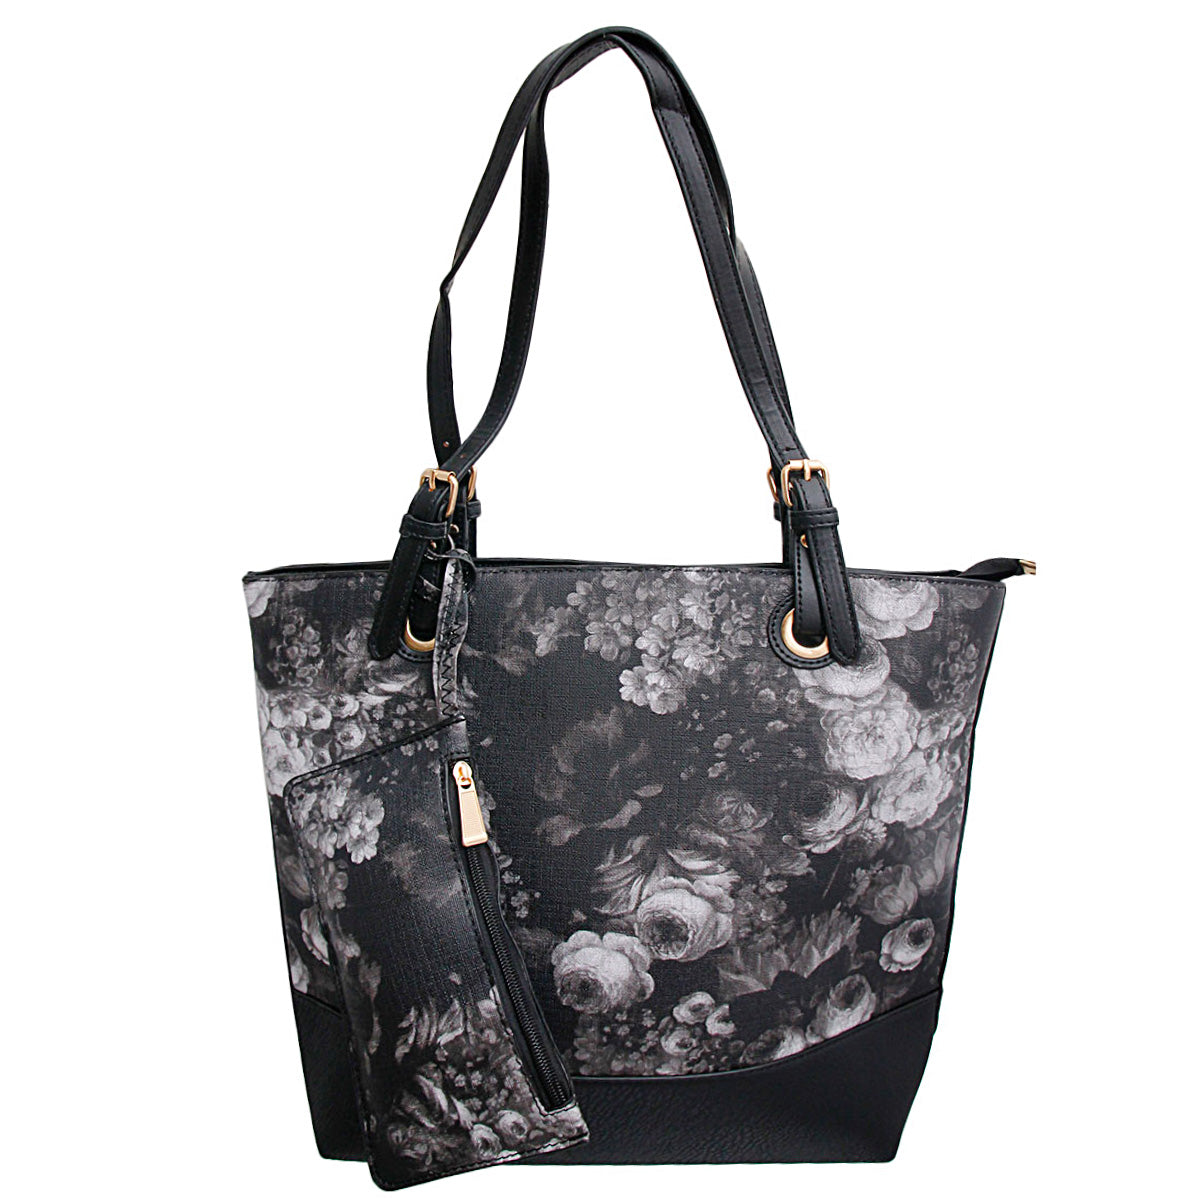 Black and White Painted Flower Tote Bag Set